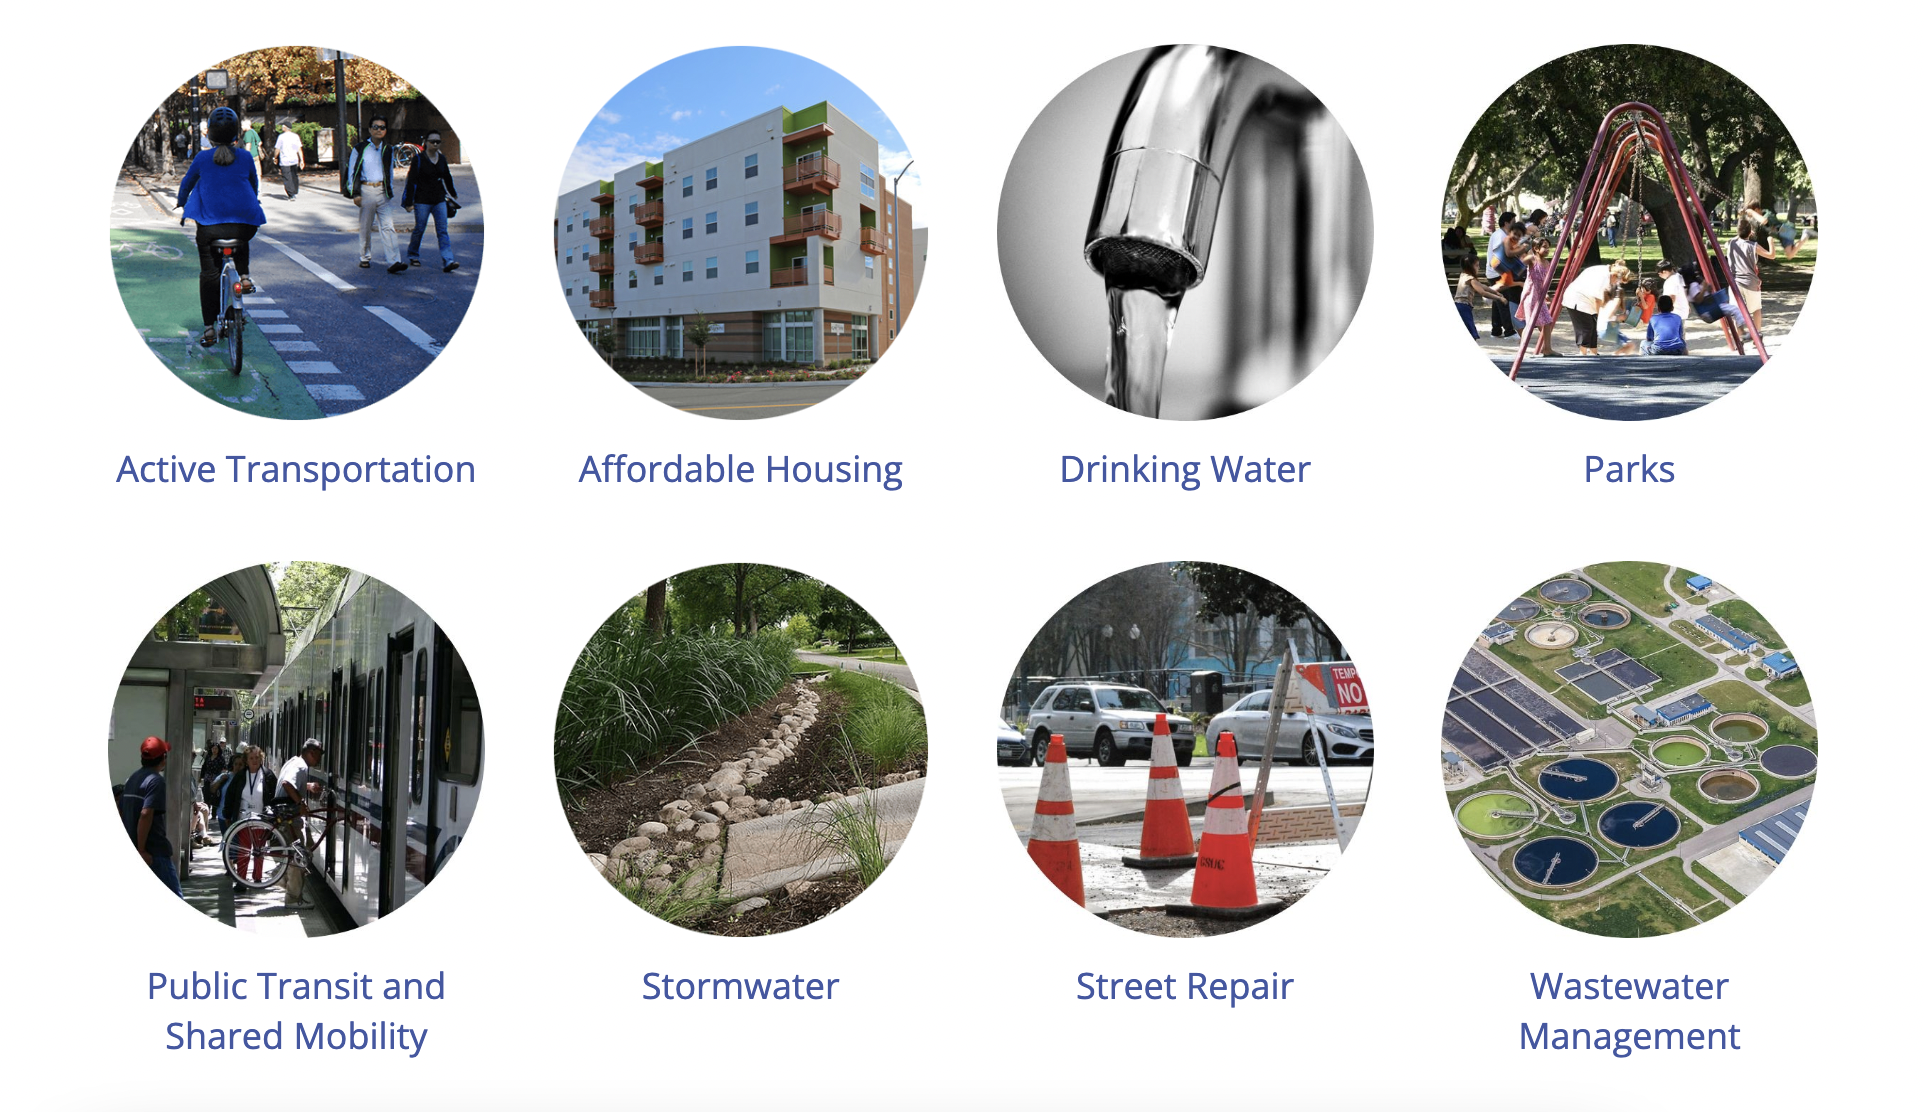 Eight icons that say Active Transportation, Affordable Housing, Drinking Water, Parks, Public Transit and Shared Mobility, Stormwater, Street Repair, and Wastewater Management